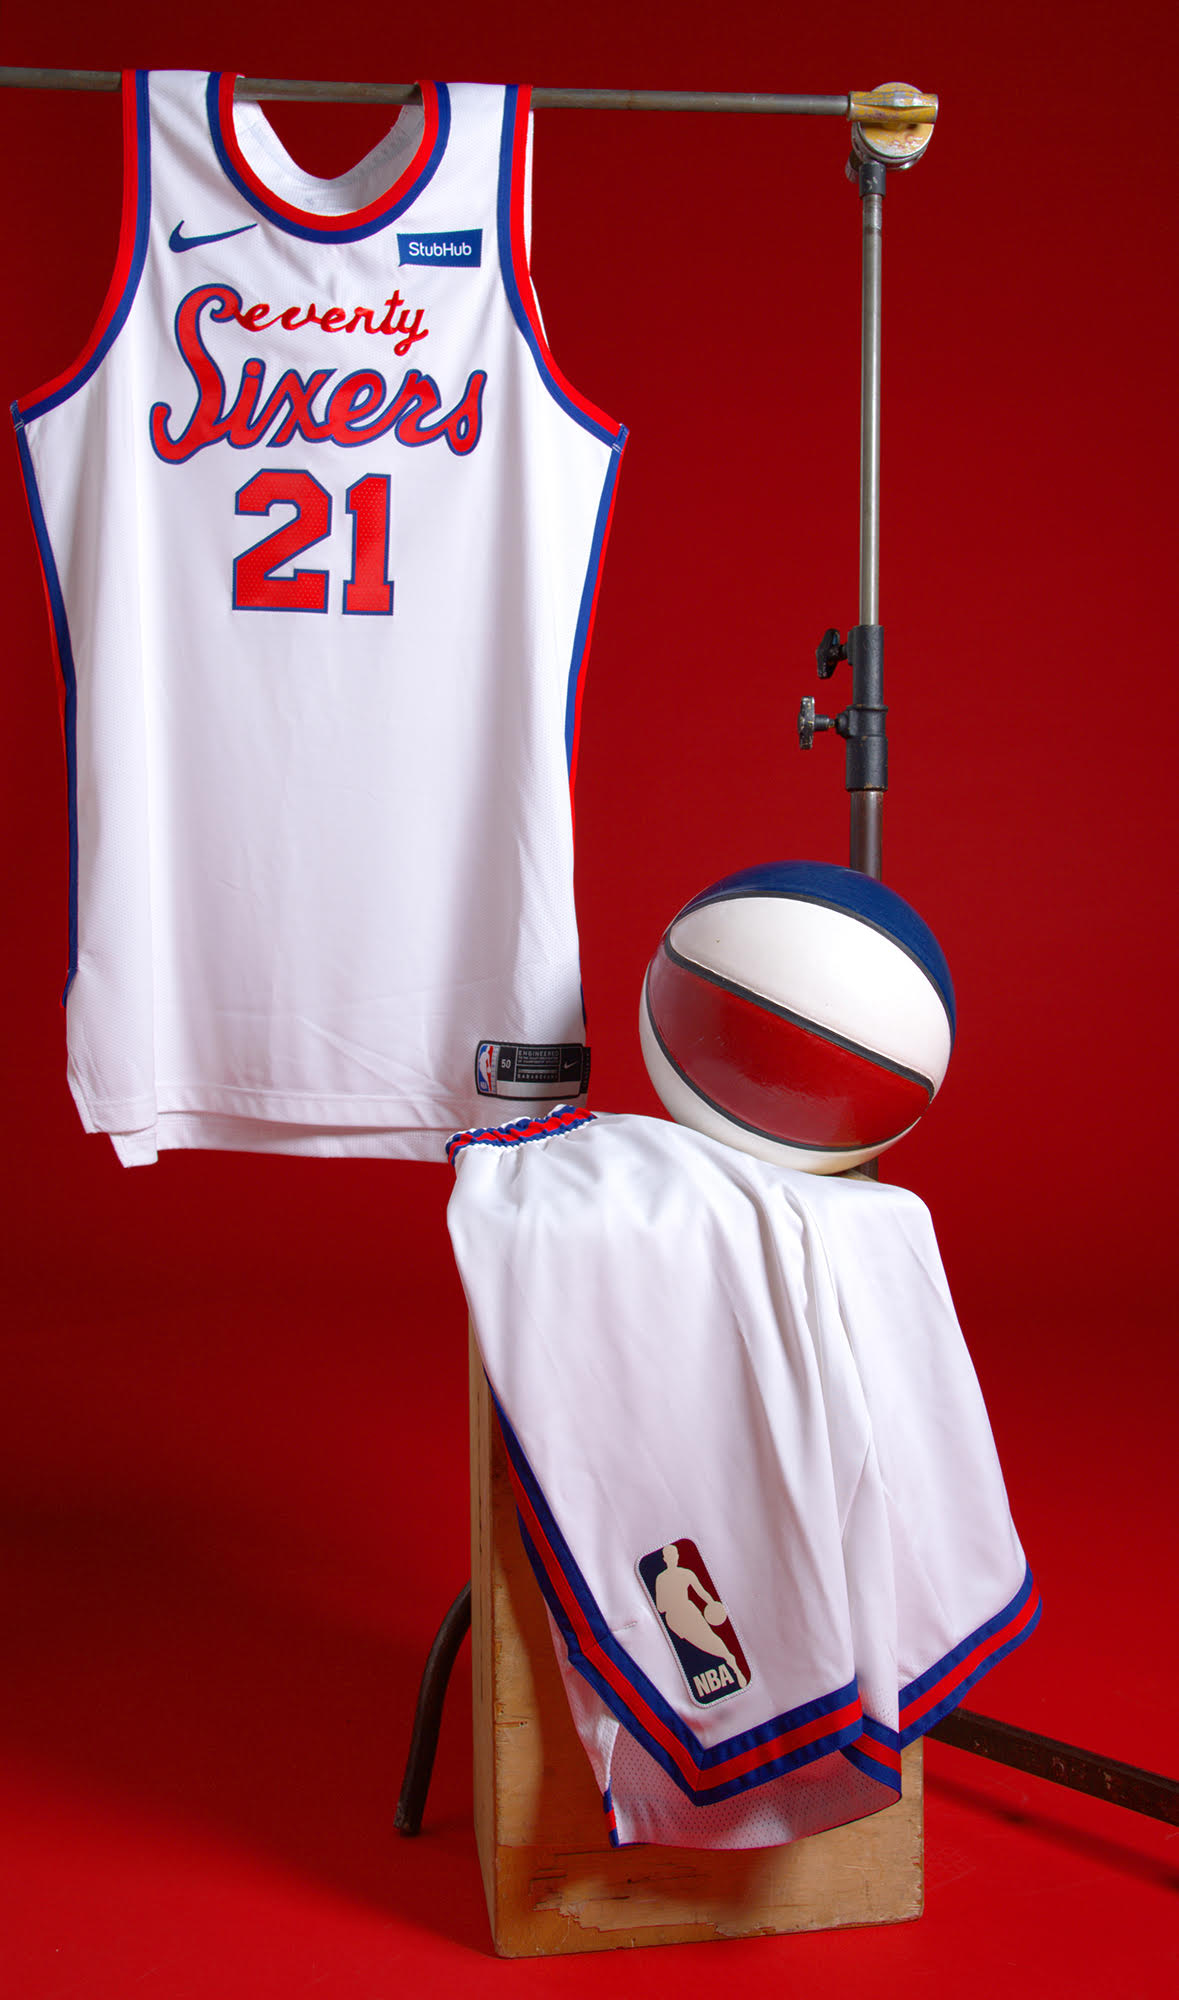 Sixers Throwback Jersey